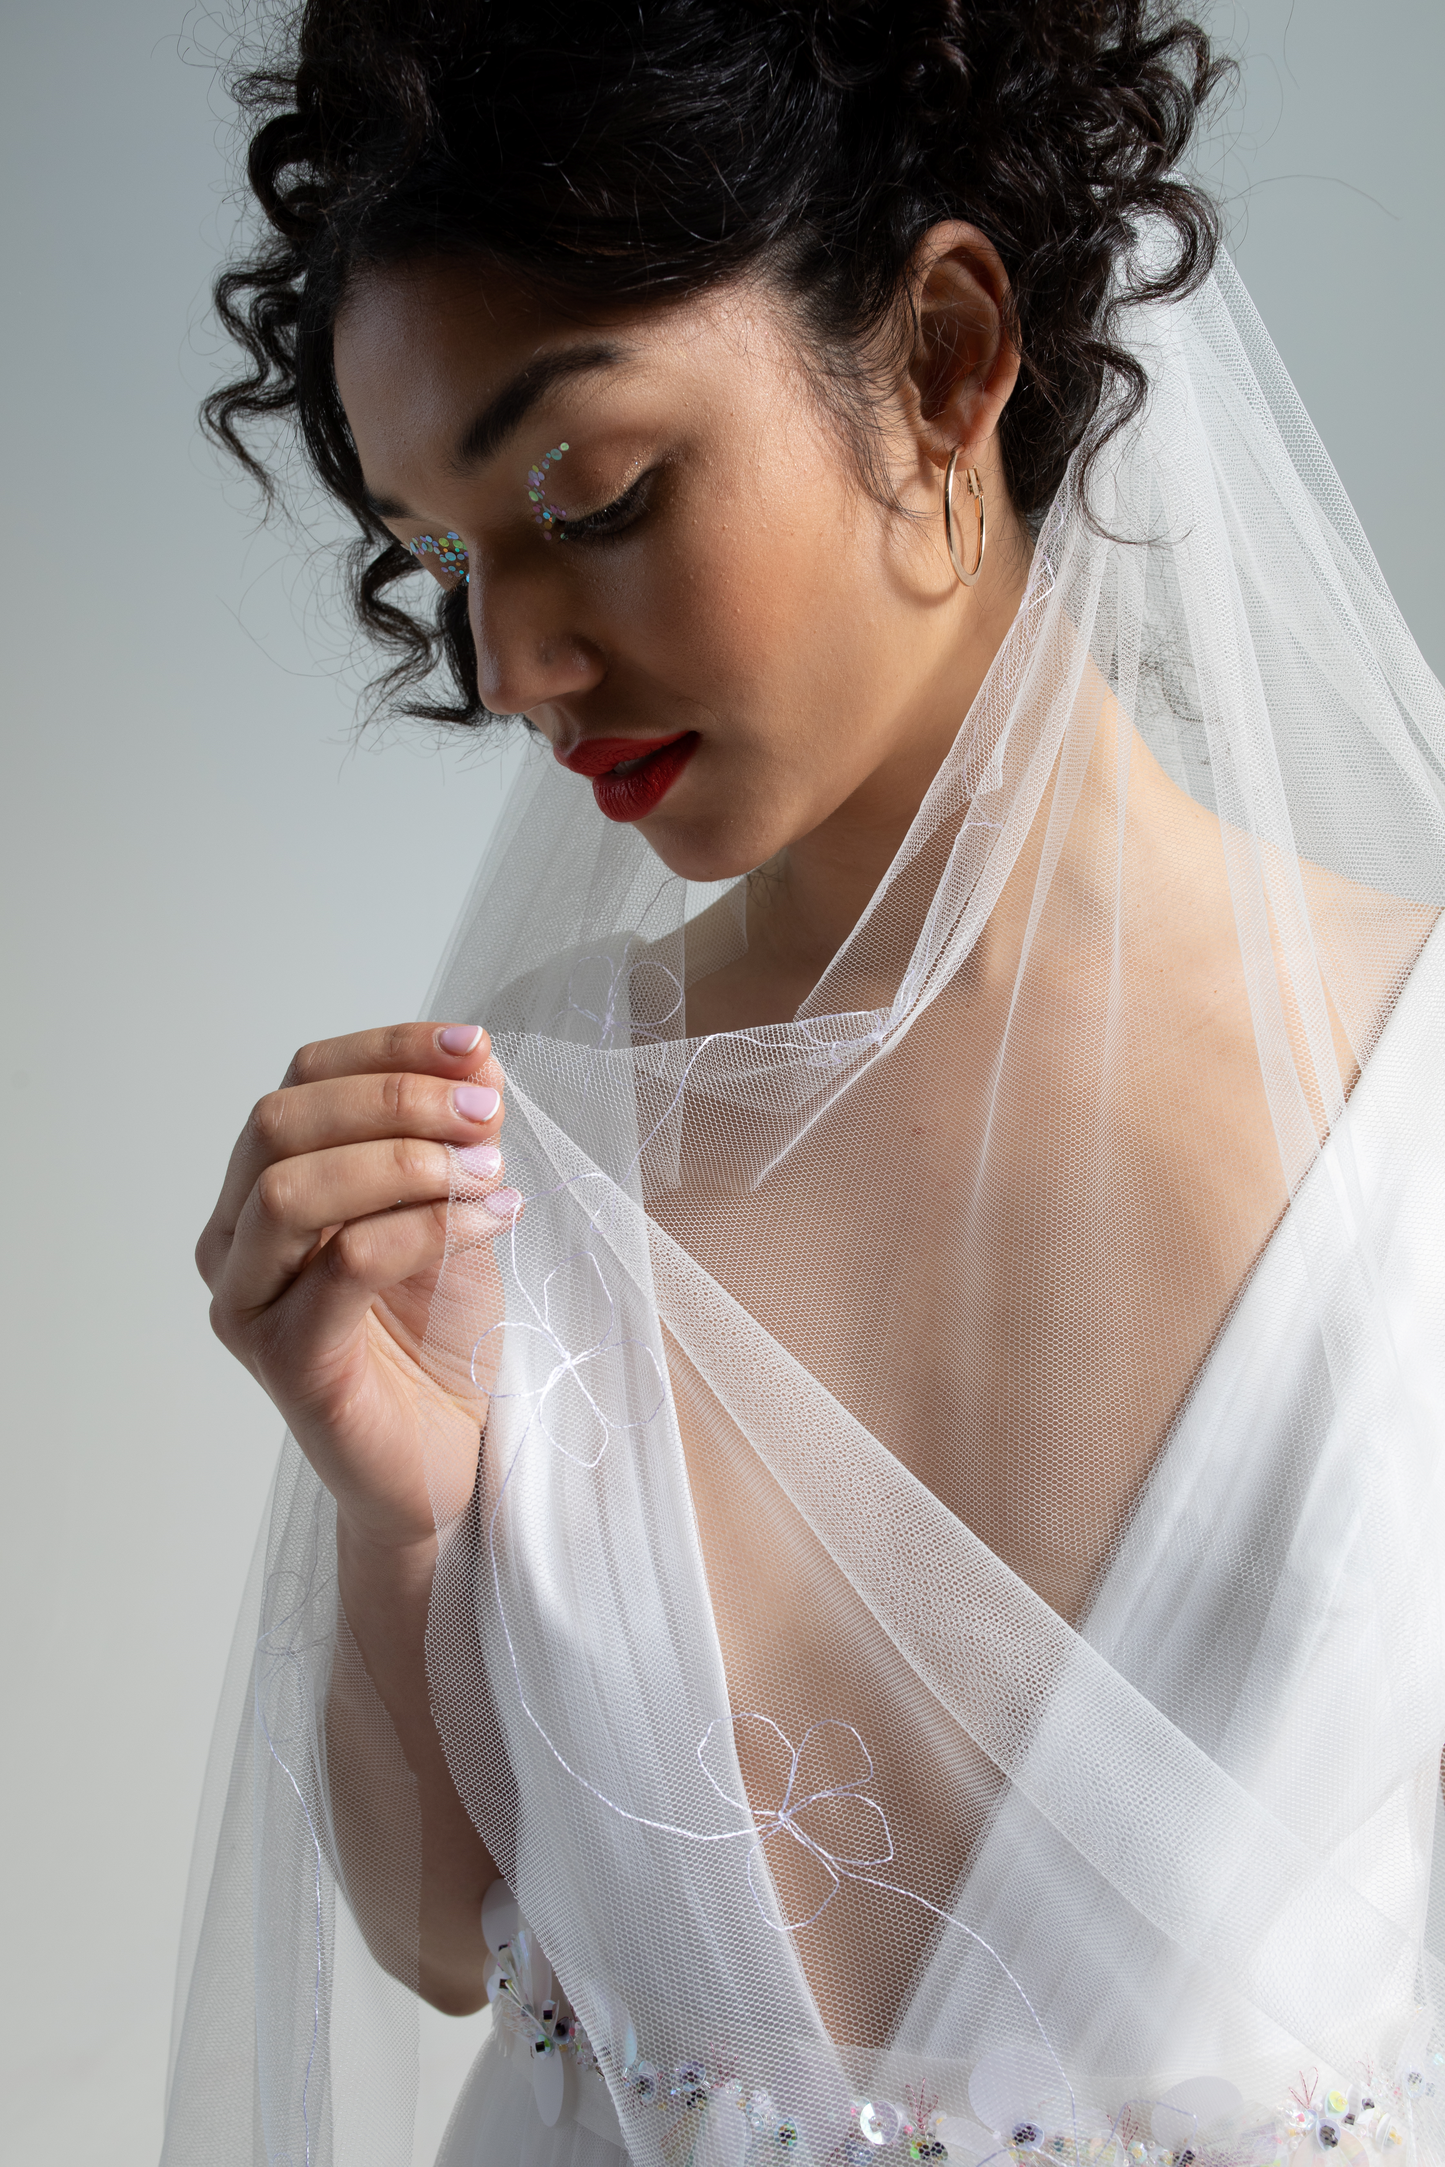 soft tulle hand-embroidered wedding veil, a floral embroidered bridal veil as part of a collection of decorative luxury bridal accessories, veils and bridal headwear